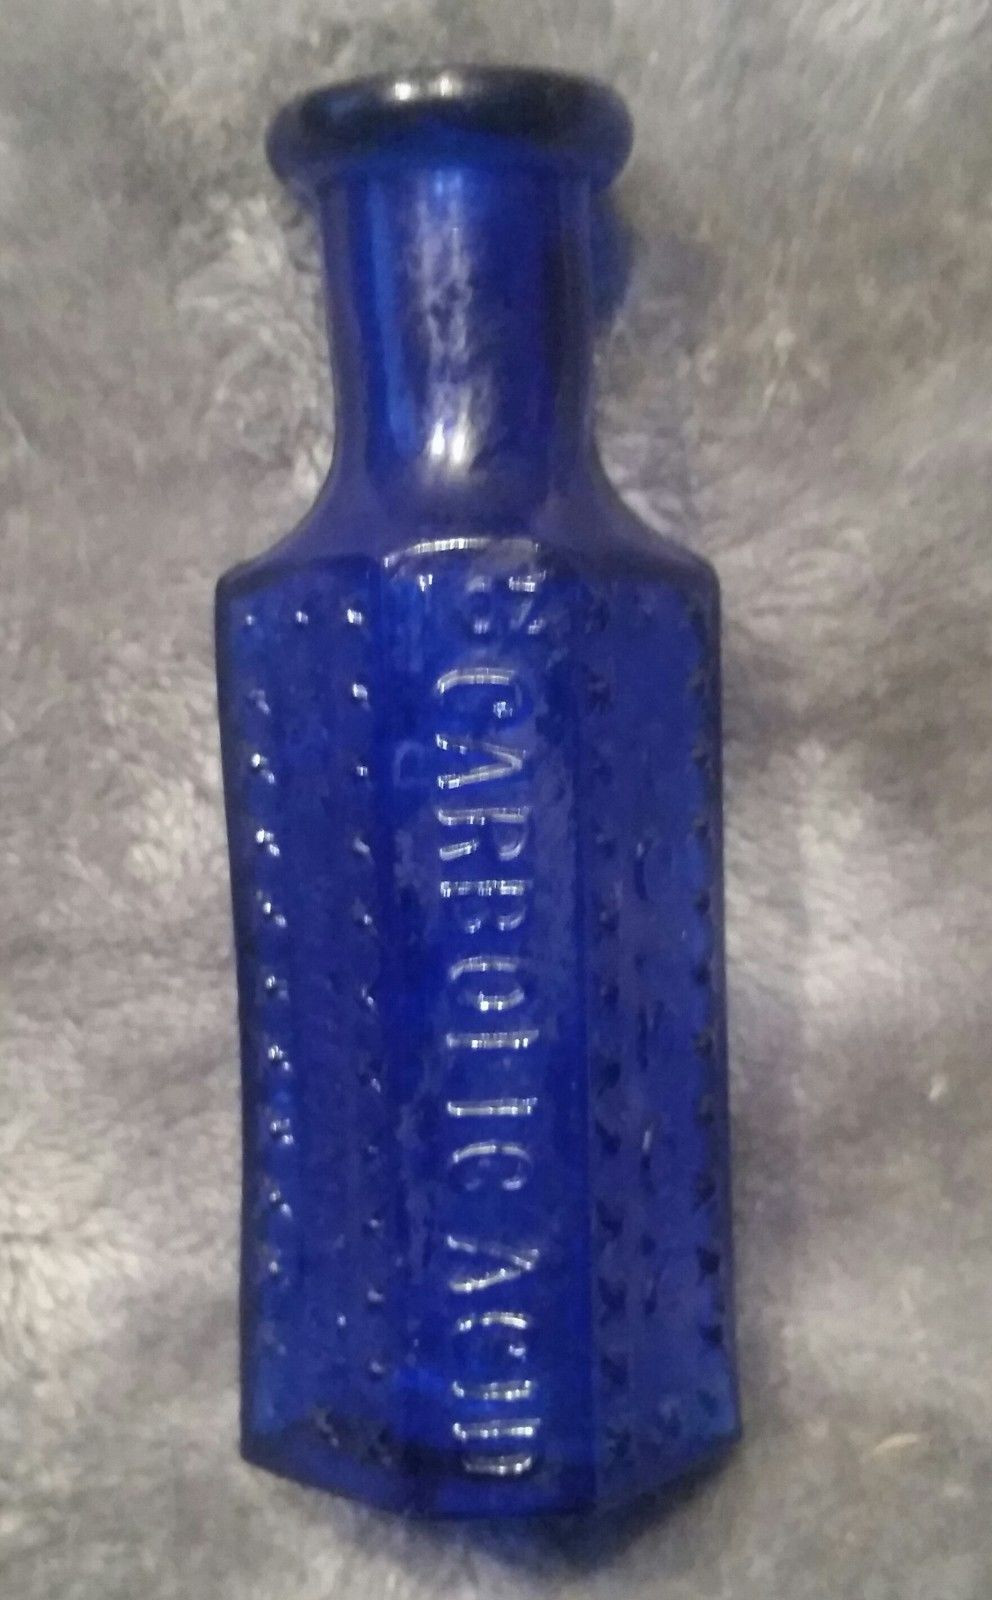 27 Unique Tall Cobalt Blue Glass Vase 2024 free download tall cobalt blue glass vase of blue poison bottle carbolic acid 3 3 8 inches tall 1 ounce ebay throughout blue poison bottle carbolic acid 3 3 8 inches tall 1 ounce